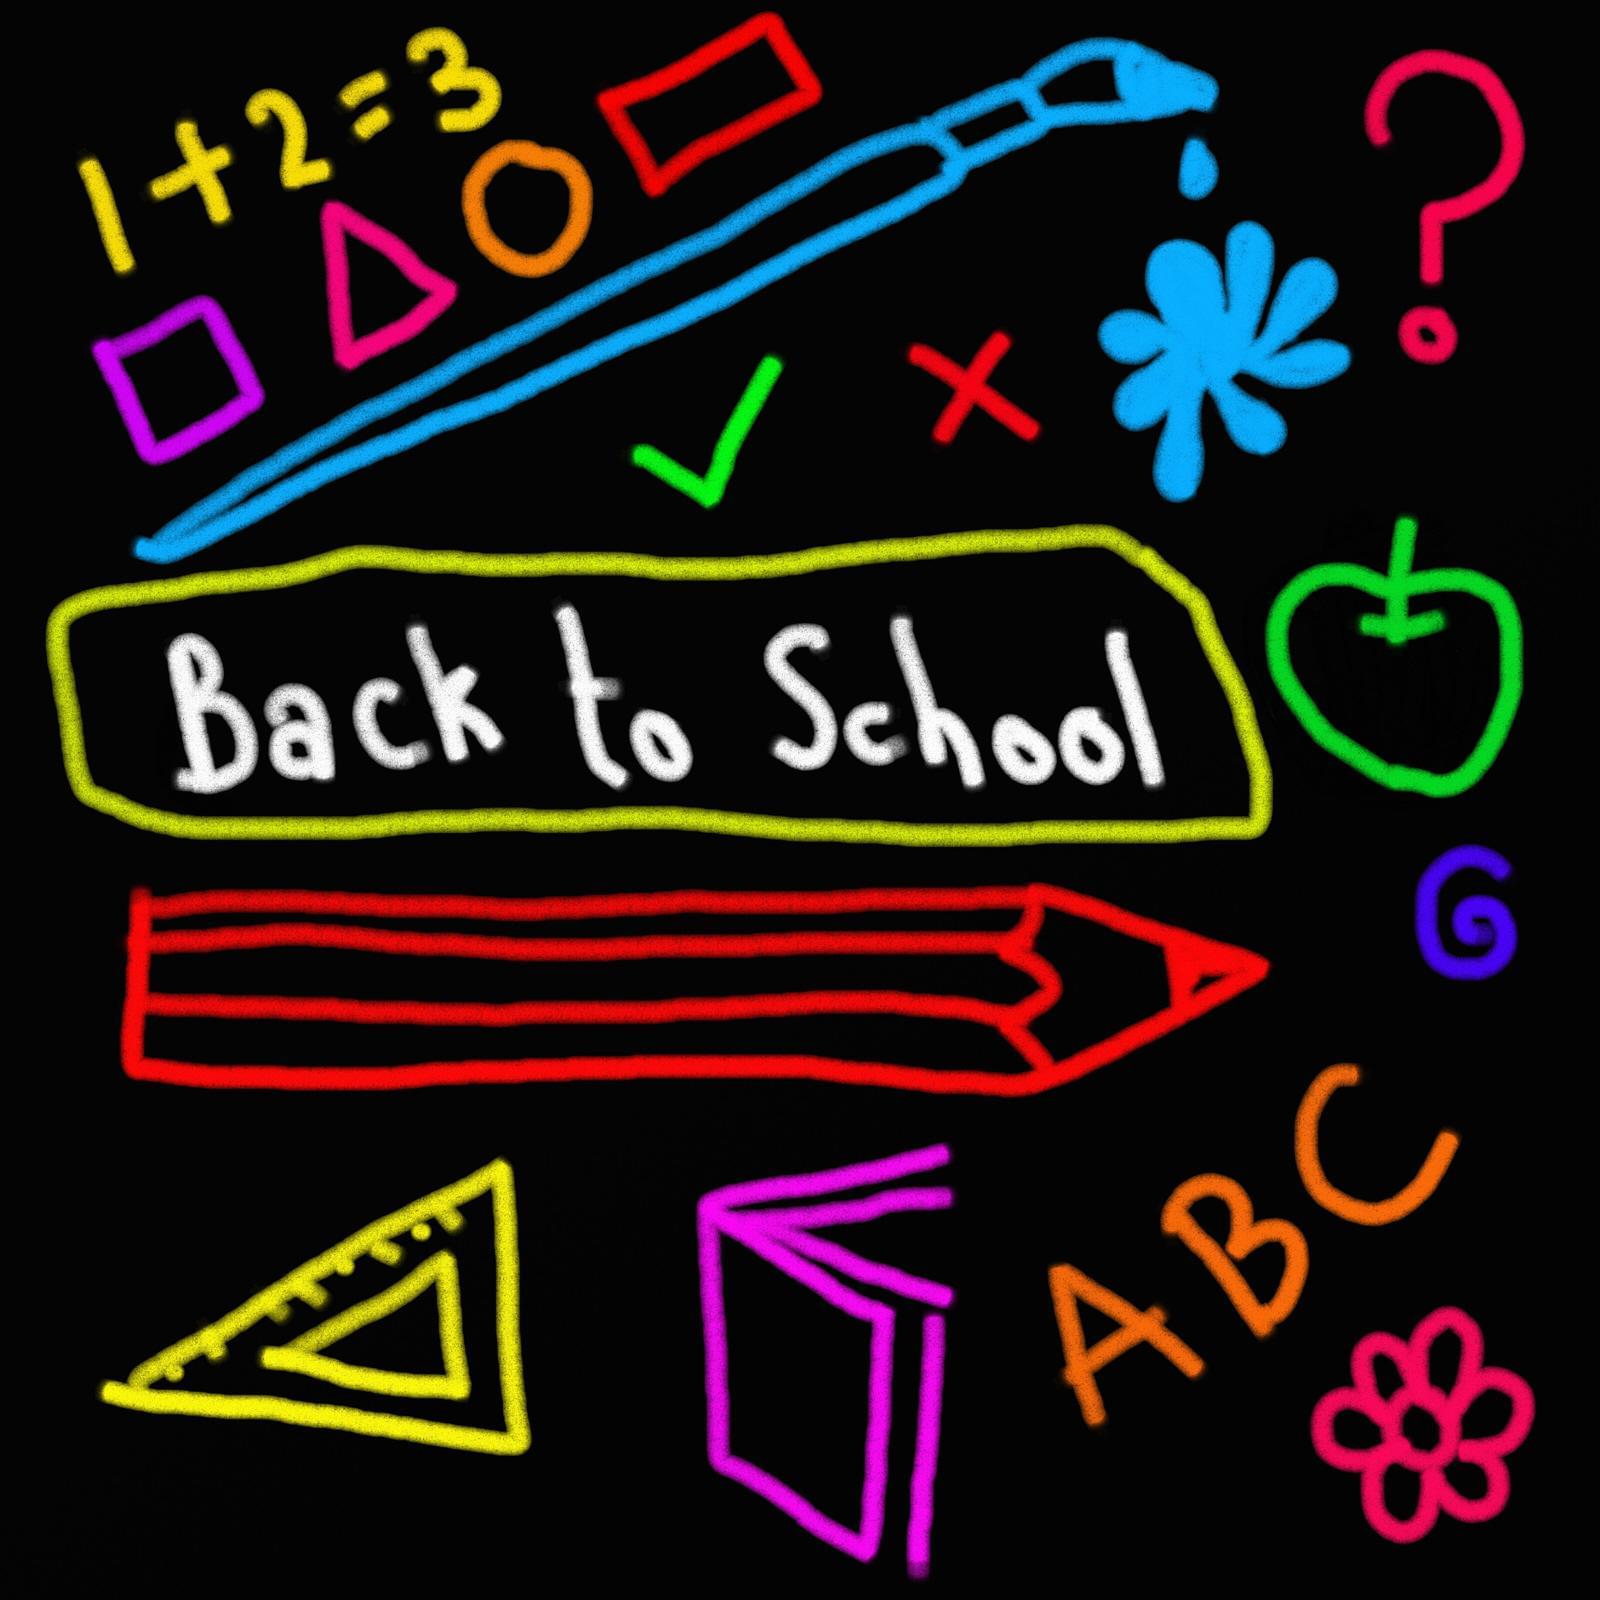 Here In The Real World…Make Back To School Again FUN!